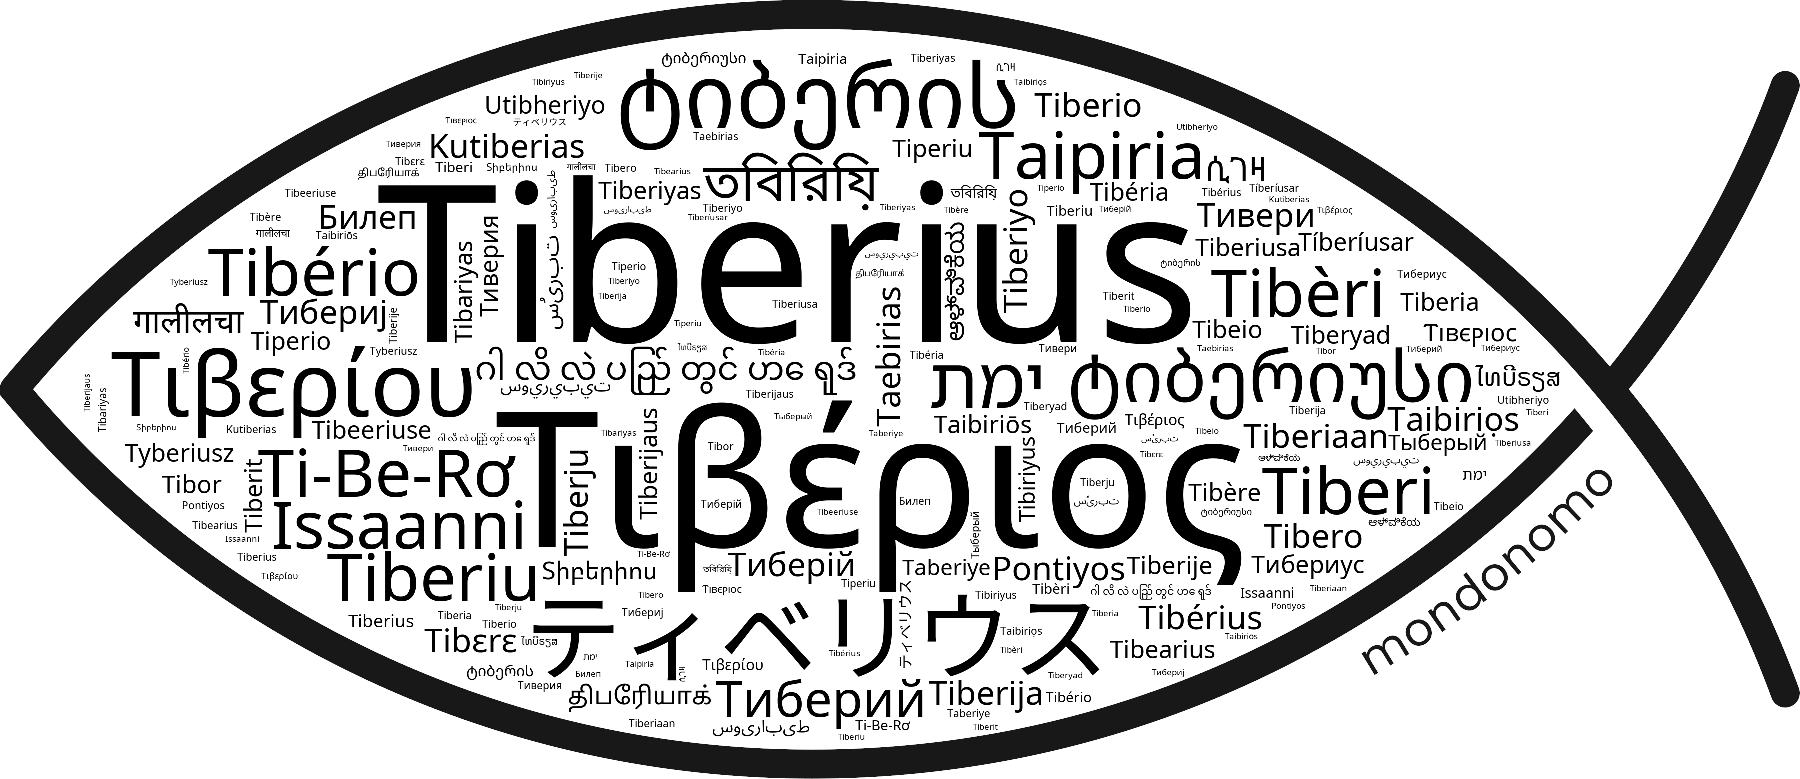 Name Tiberius in the world's Bibles